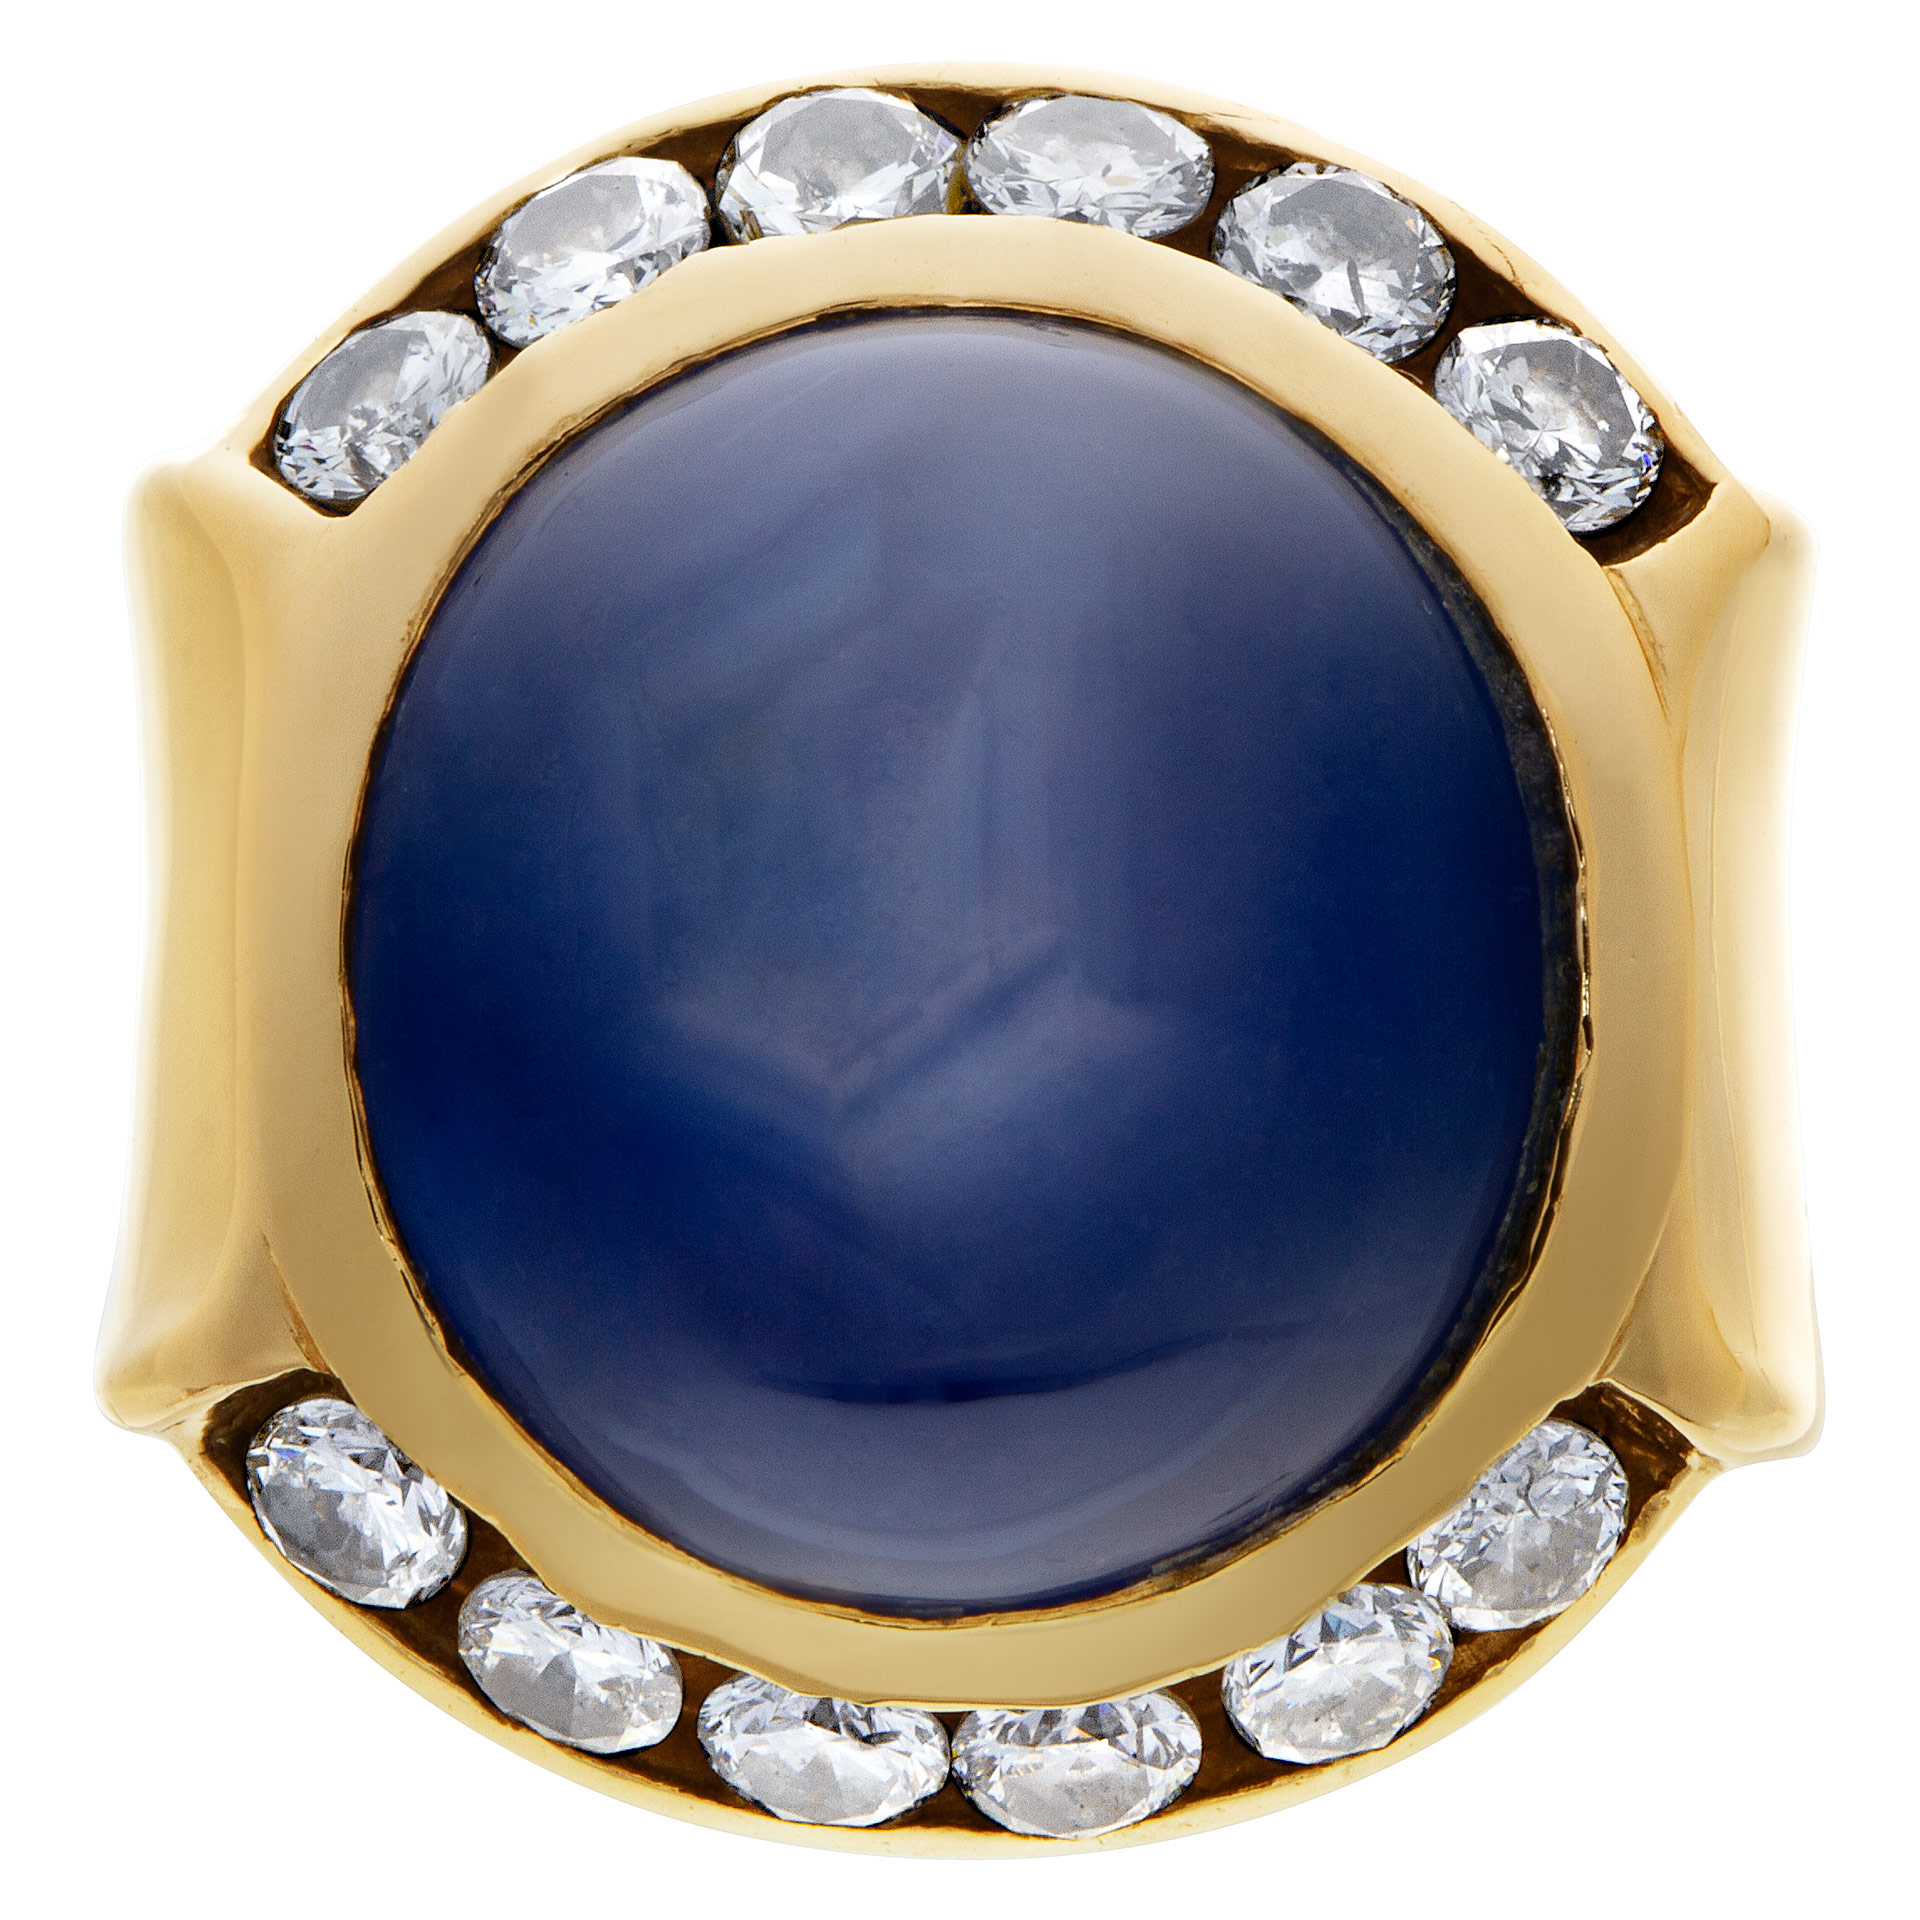 Cabochon Star sapphire & diamonds ring, set in 14K yellow gold.